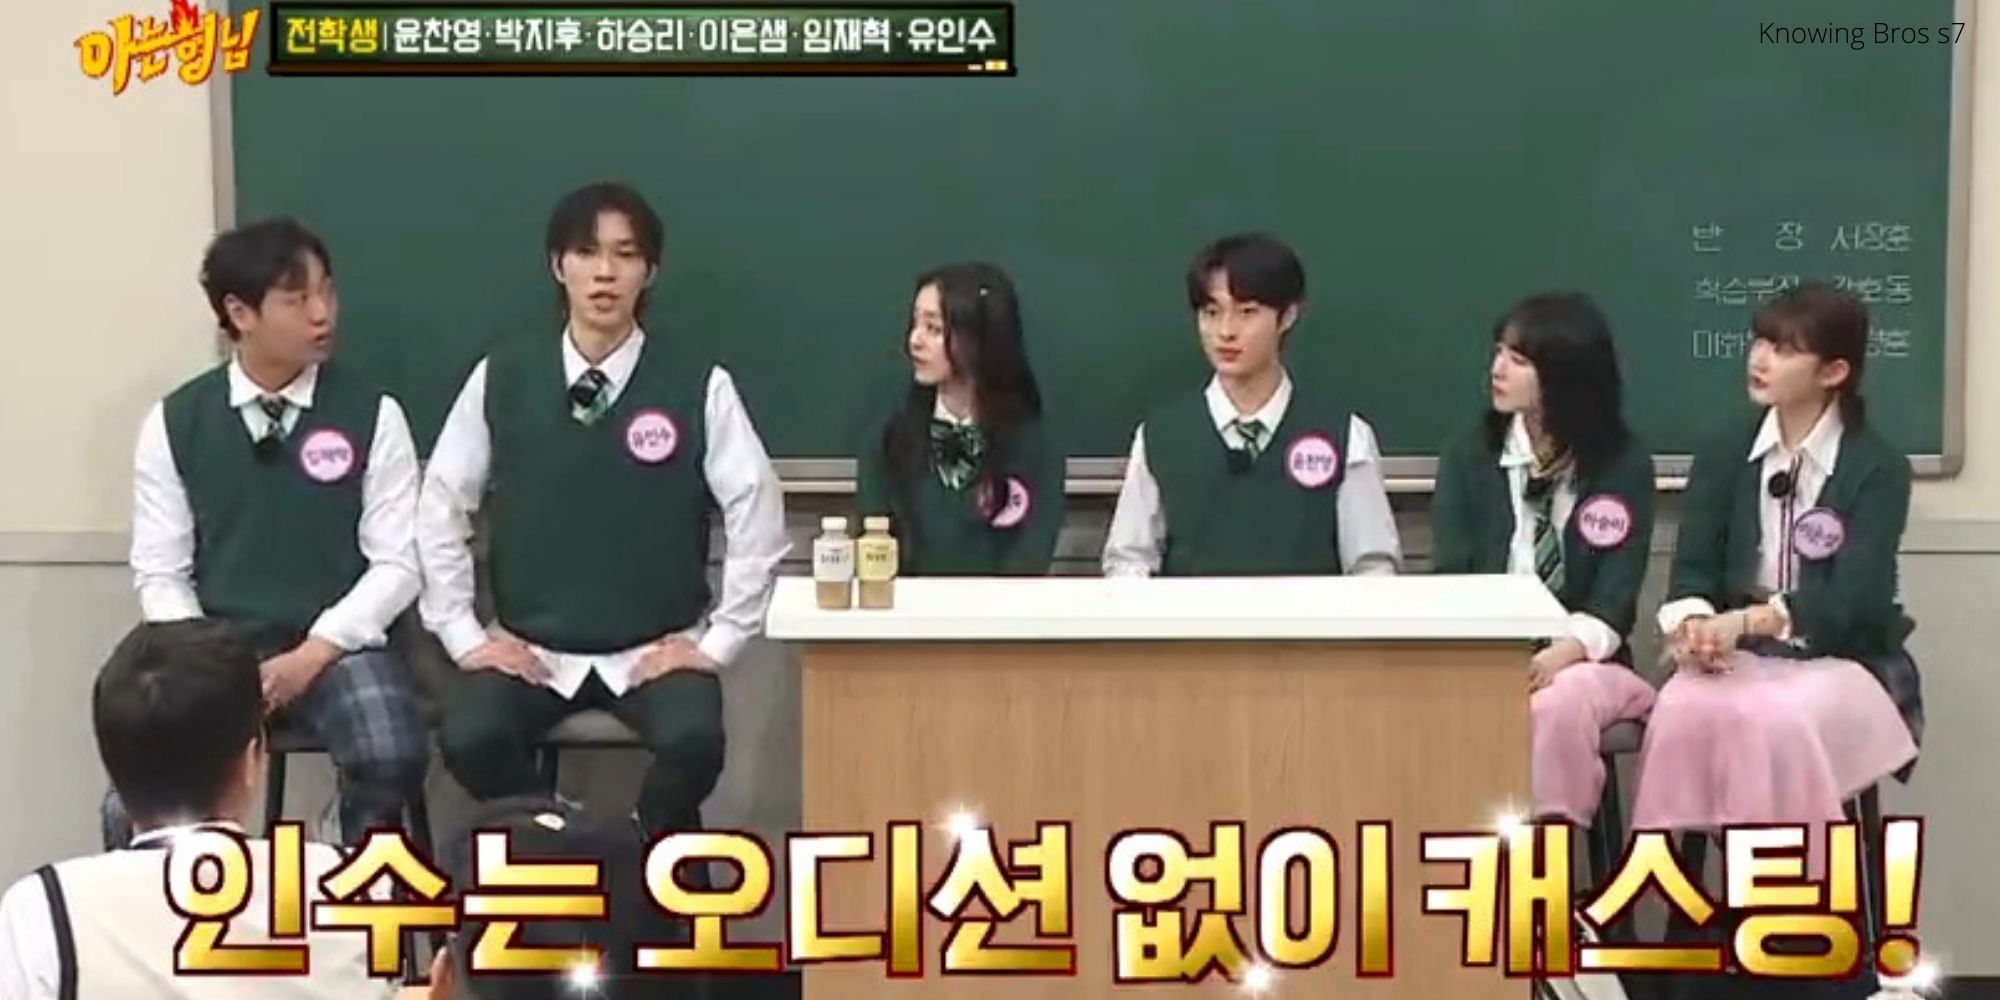 Knowing Bros s7